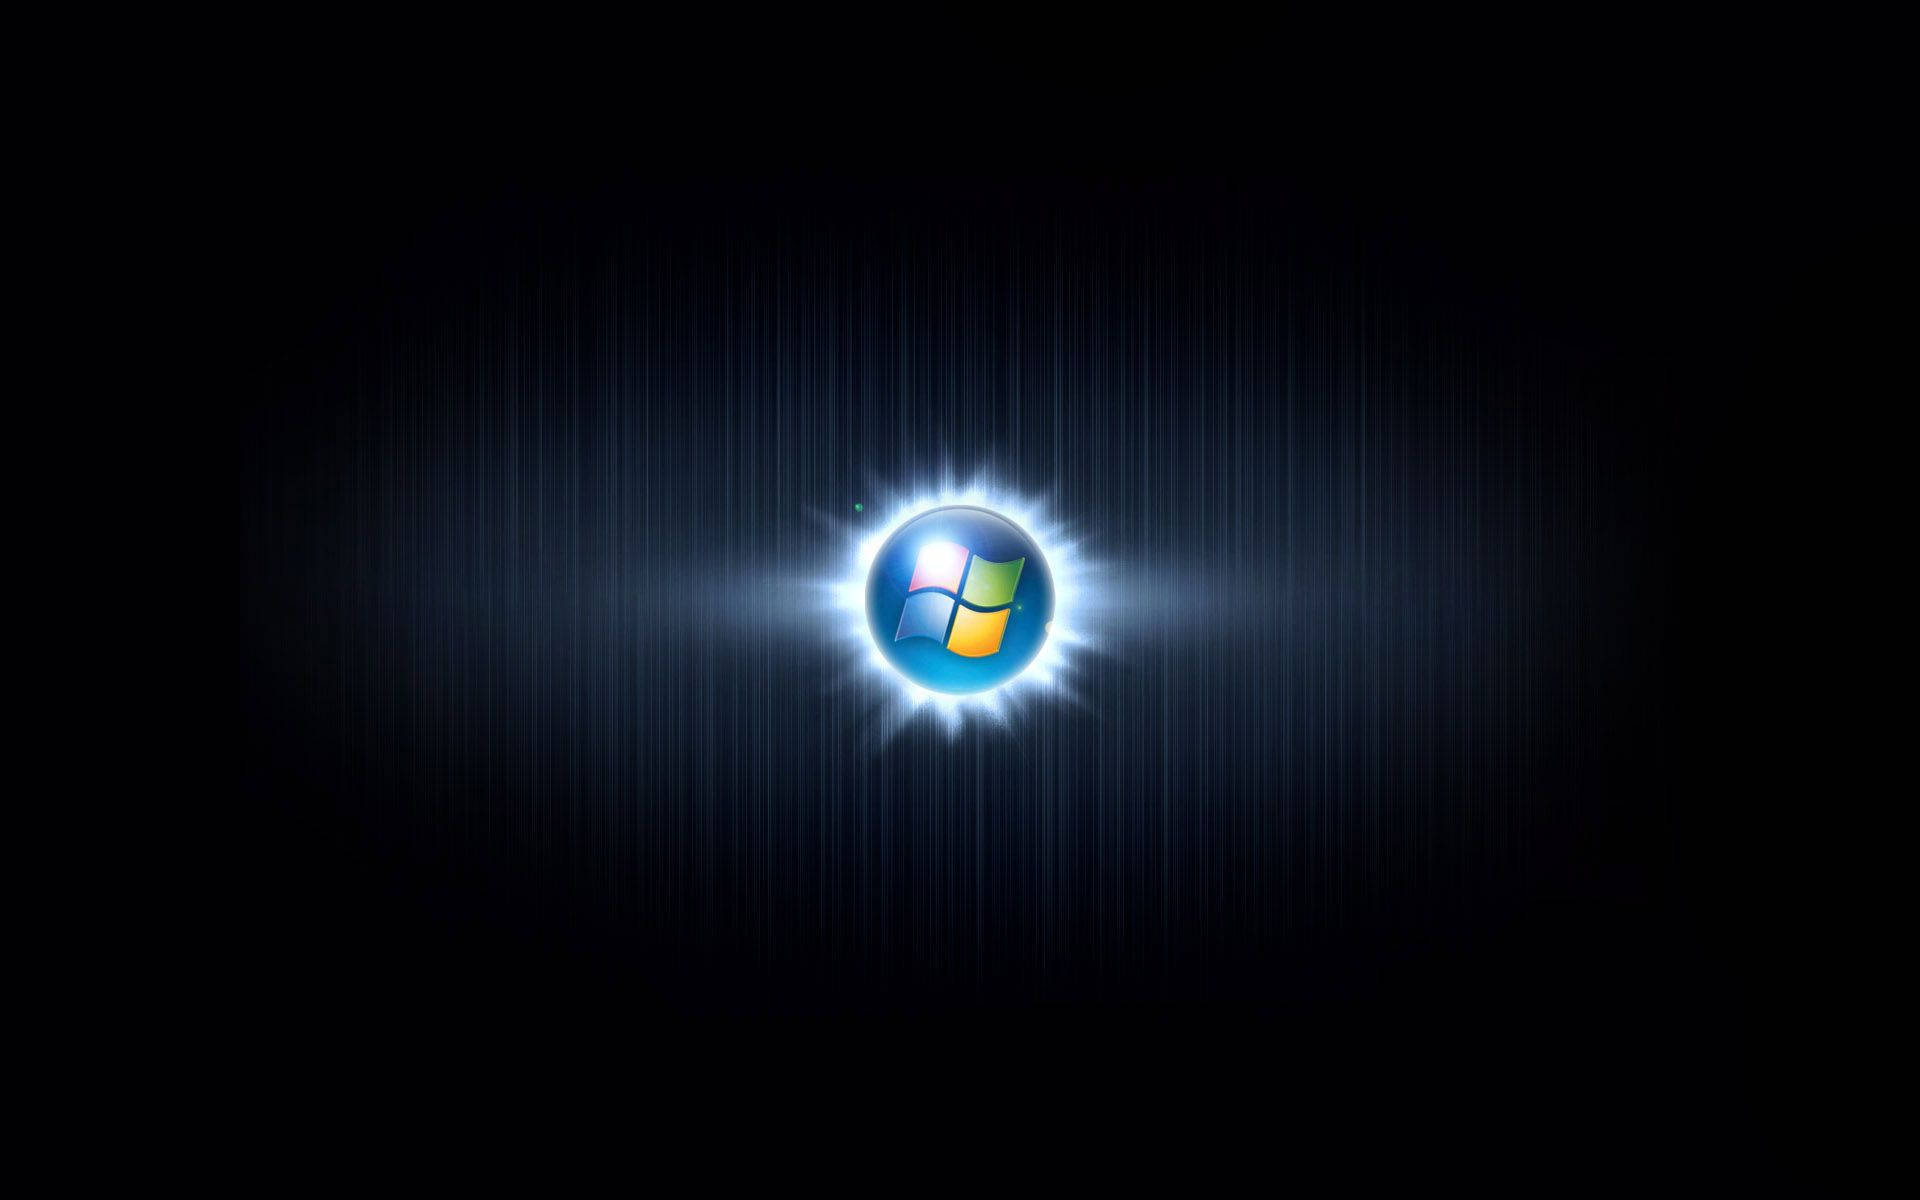 "Windows 10: For a Smoother, More Glowing Experience" Wallpaper